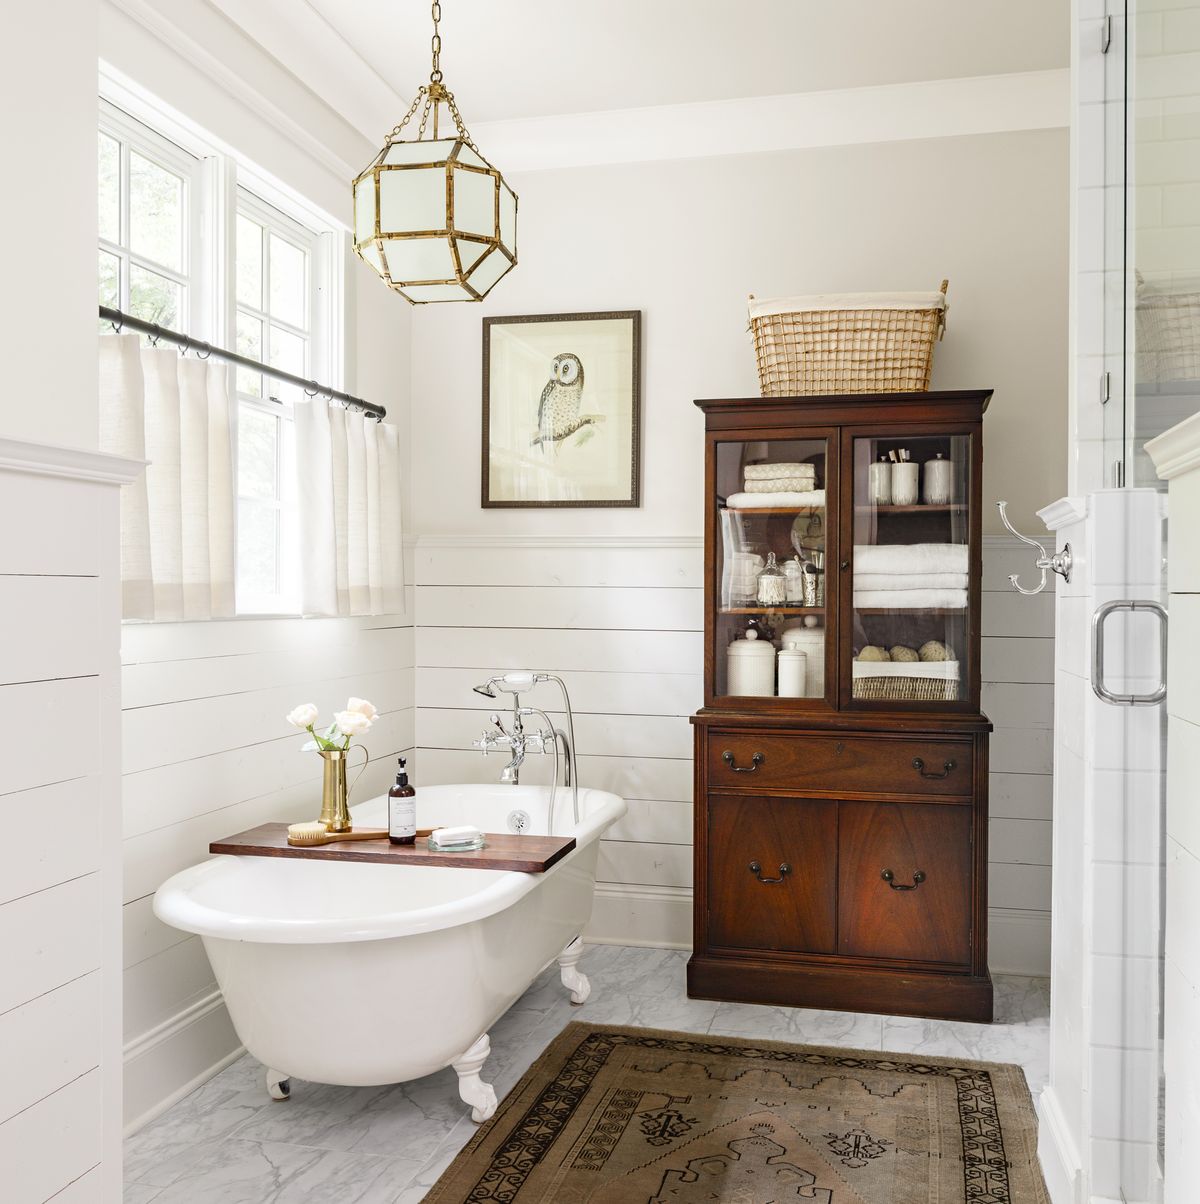 https://hips.hearstapps.com/hmg-prod/images/white-rolled-rim-claw-foot-tub-with-painted-feet-1557461244.jpg?crop=1.00xw:0.669xh;0,0.218xh&resize=1200:*